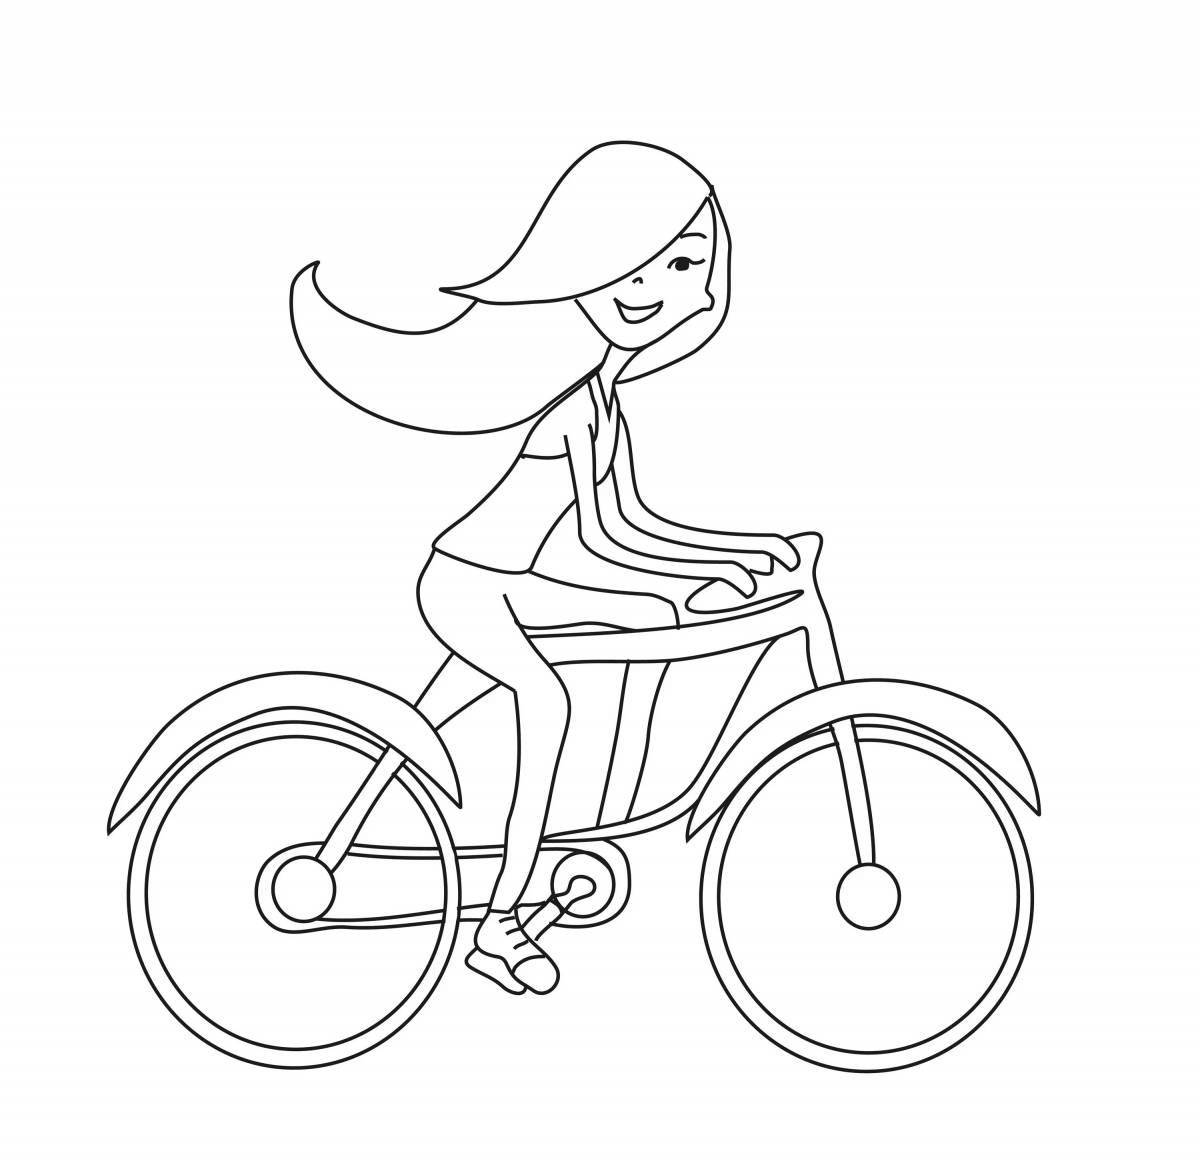 A charming girl on a bicycle